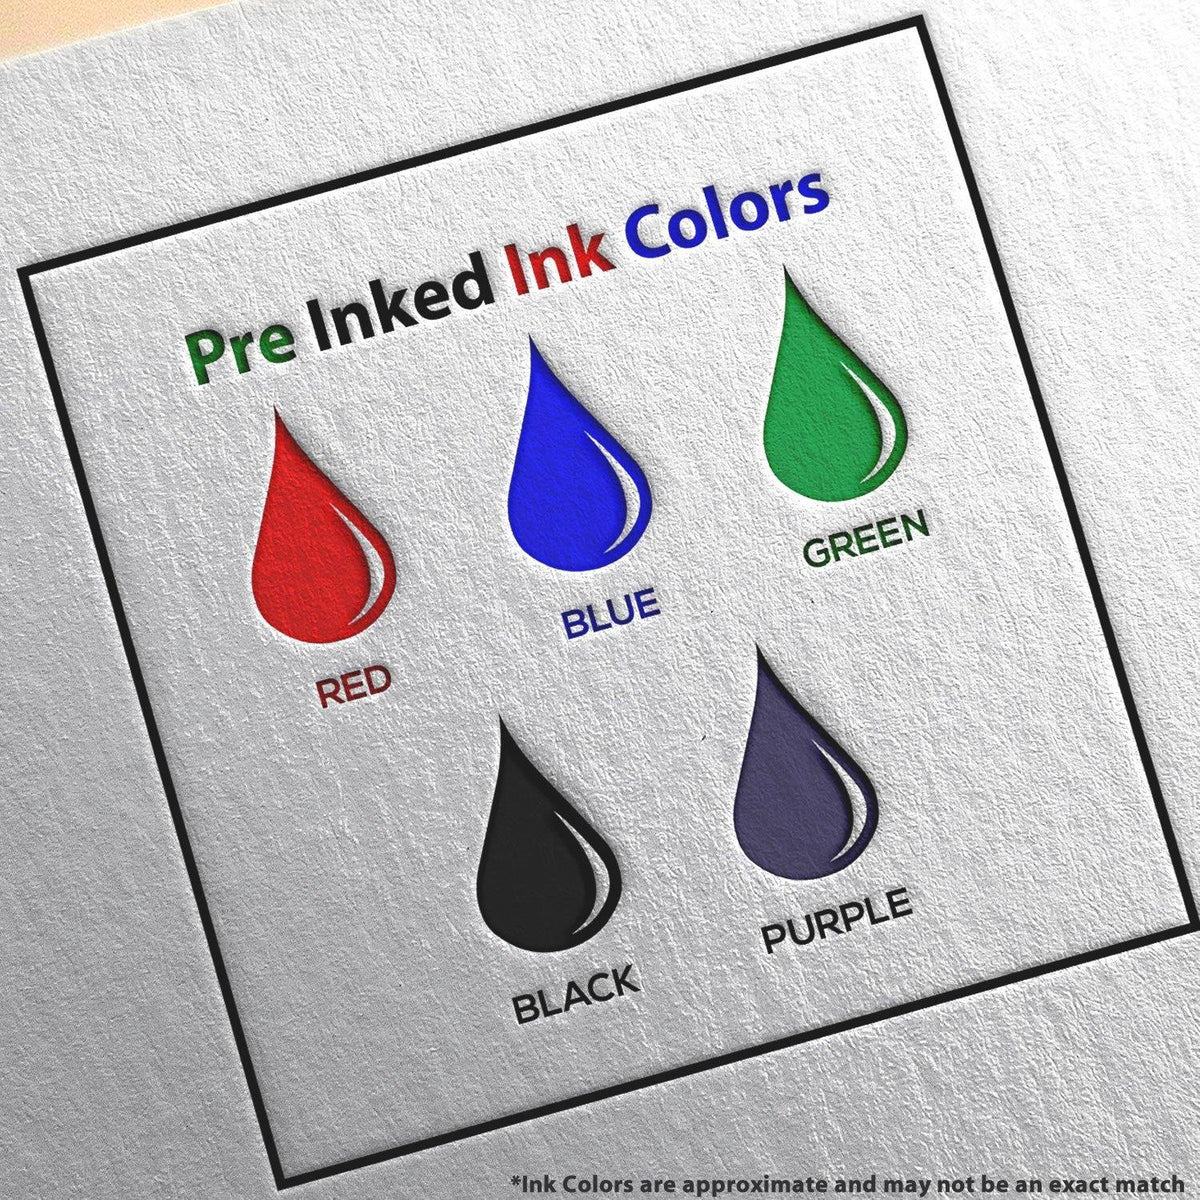 Large Pre-Inked Entered with Date Box Stamp Ink Color Options